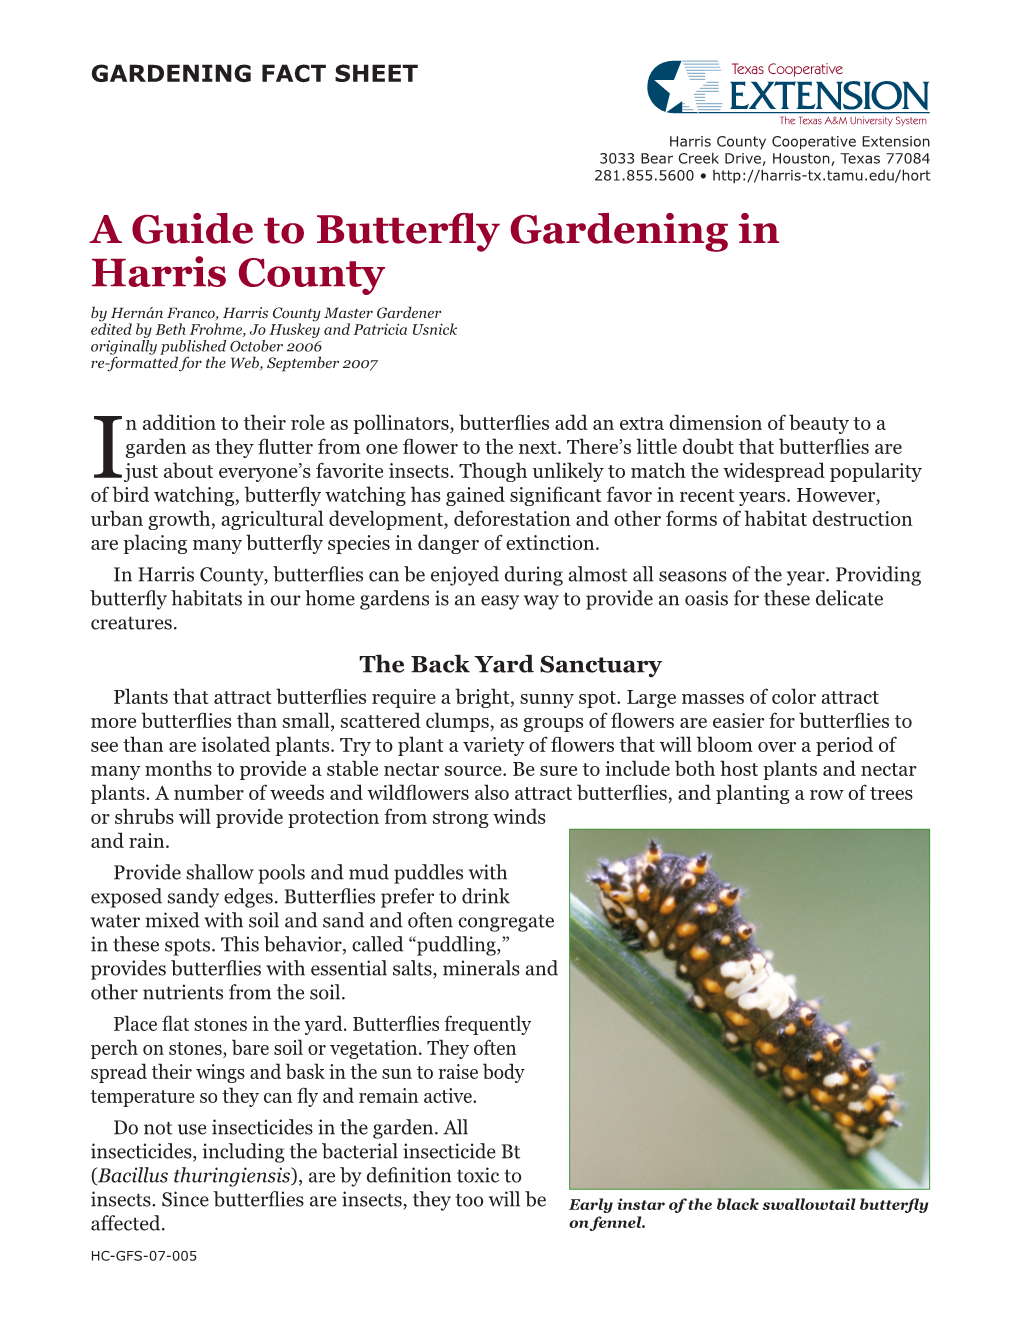 A Guide to Butterfly Gardening in Harris County